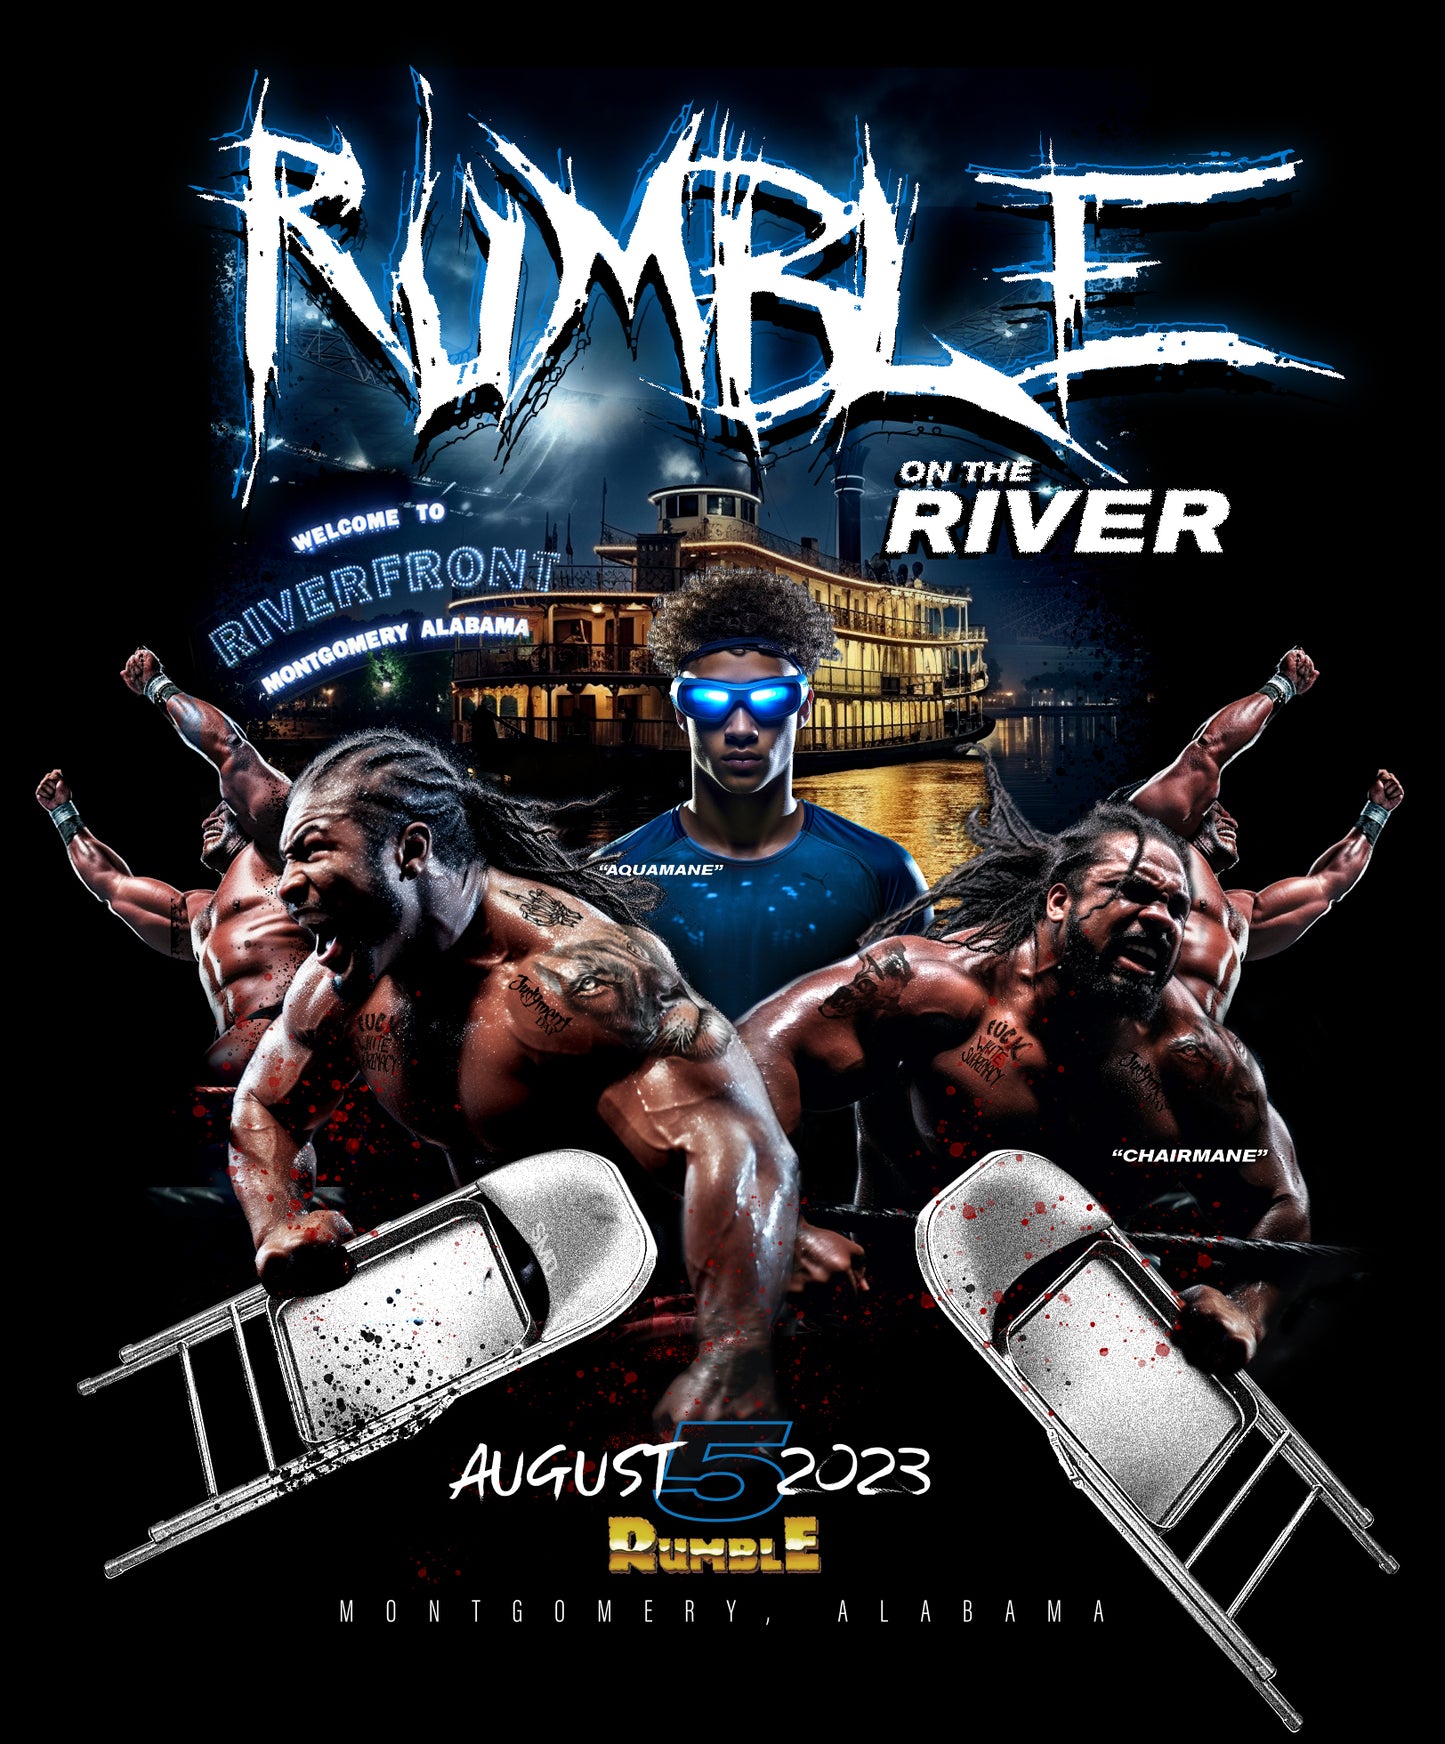 THE ALABAMA RUMBLE on the RIVER TEE 2023